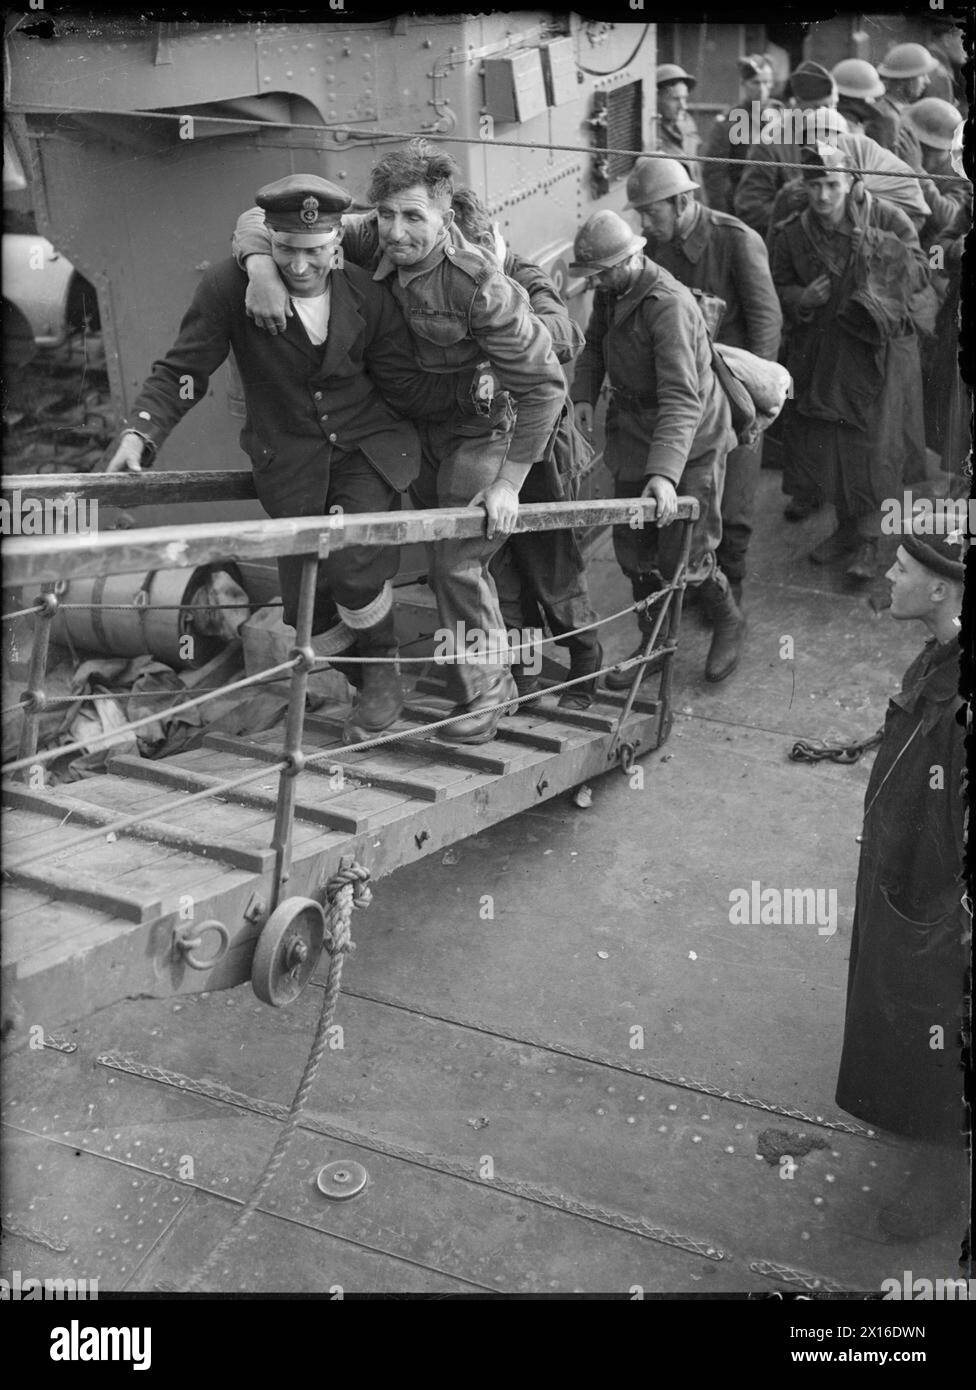 THE BRITISH ARMY IN THE UK: EVACUATION FROM DUNKIRK, MAY-JUNE 1940 - A merchant sailor assists a wounded british soldier up the gangplank from a destroyer, Dover, 31 May 1940 Stock Photo